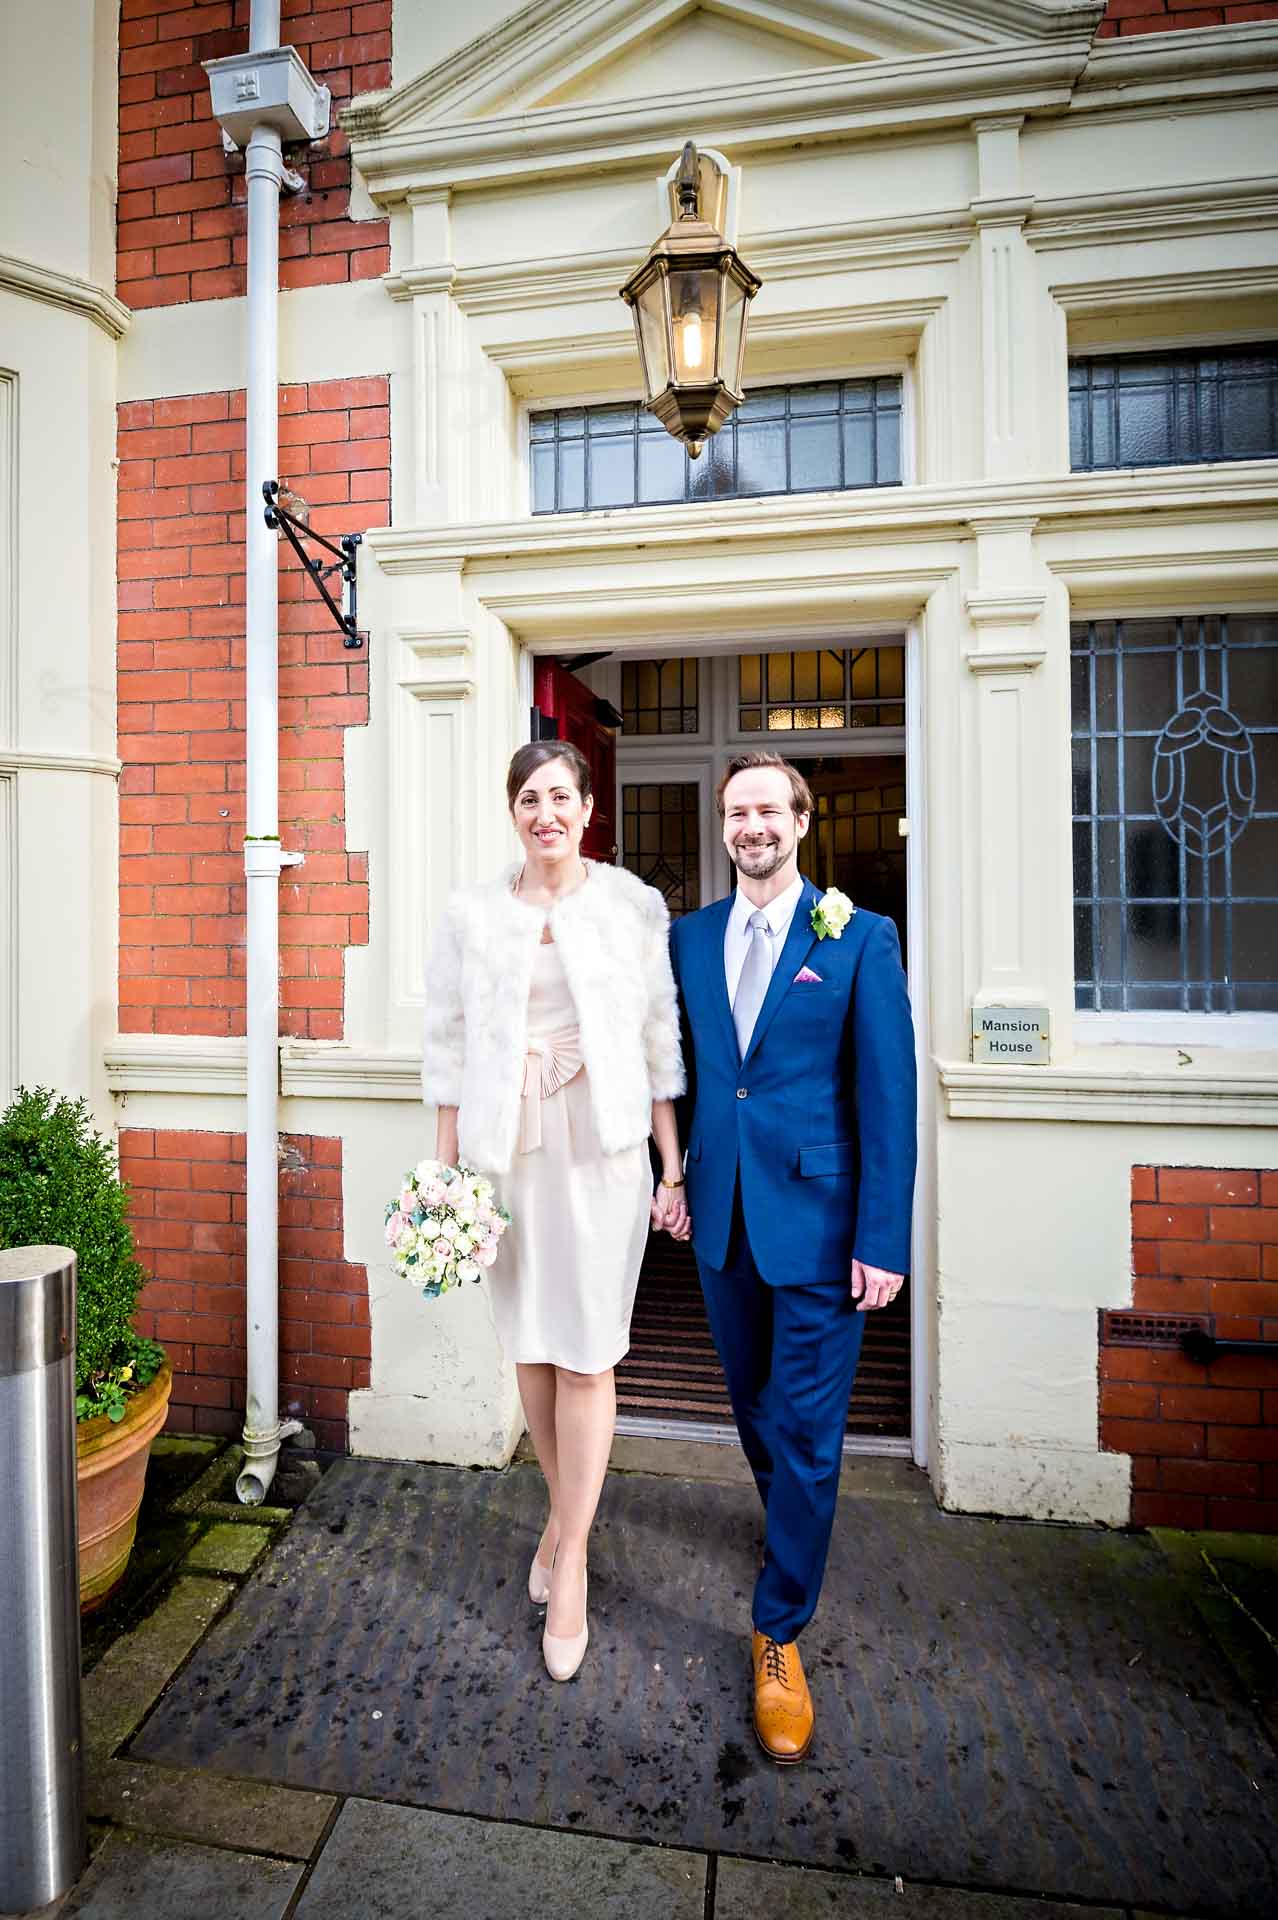 Bride and Groom Exiting Mansion House in Newport